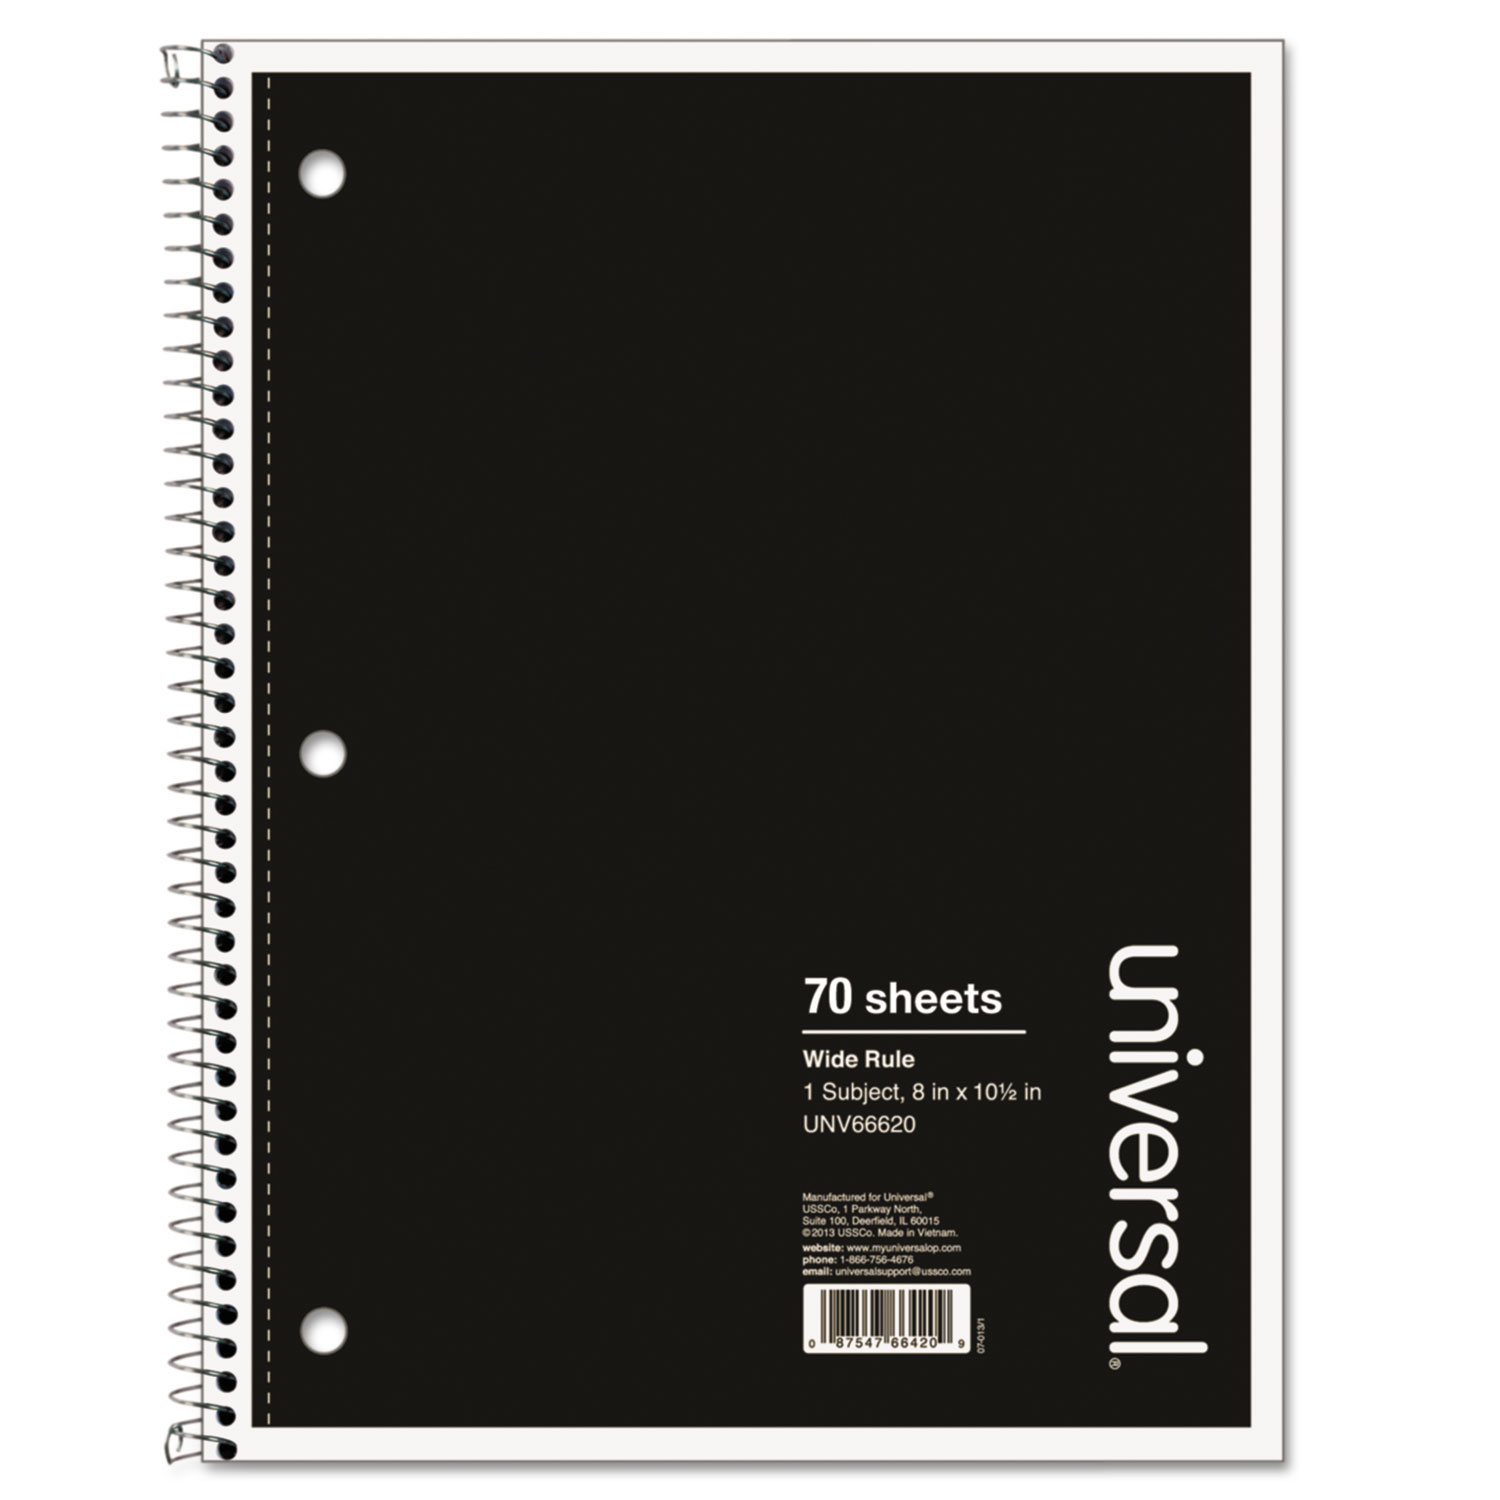  Universal UNV66620 Wirebound Notebook, 1 Subject, Wide/Legal Rule, Black Cover, 10.5 x 8, 70 Sheets (UNV66620) 